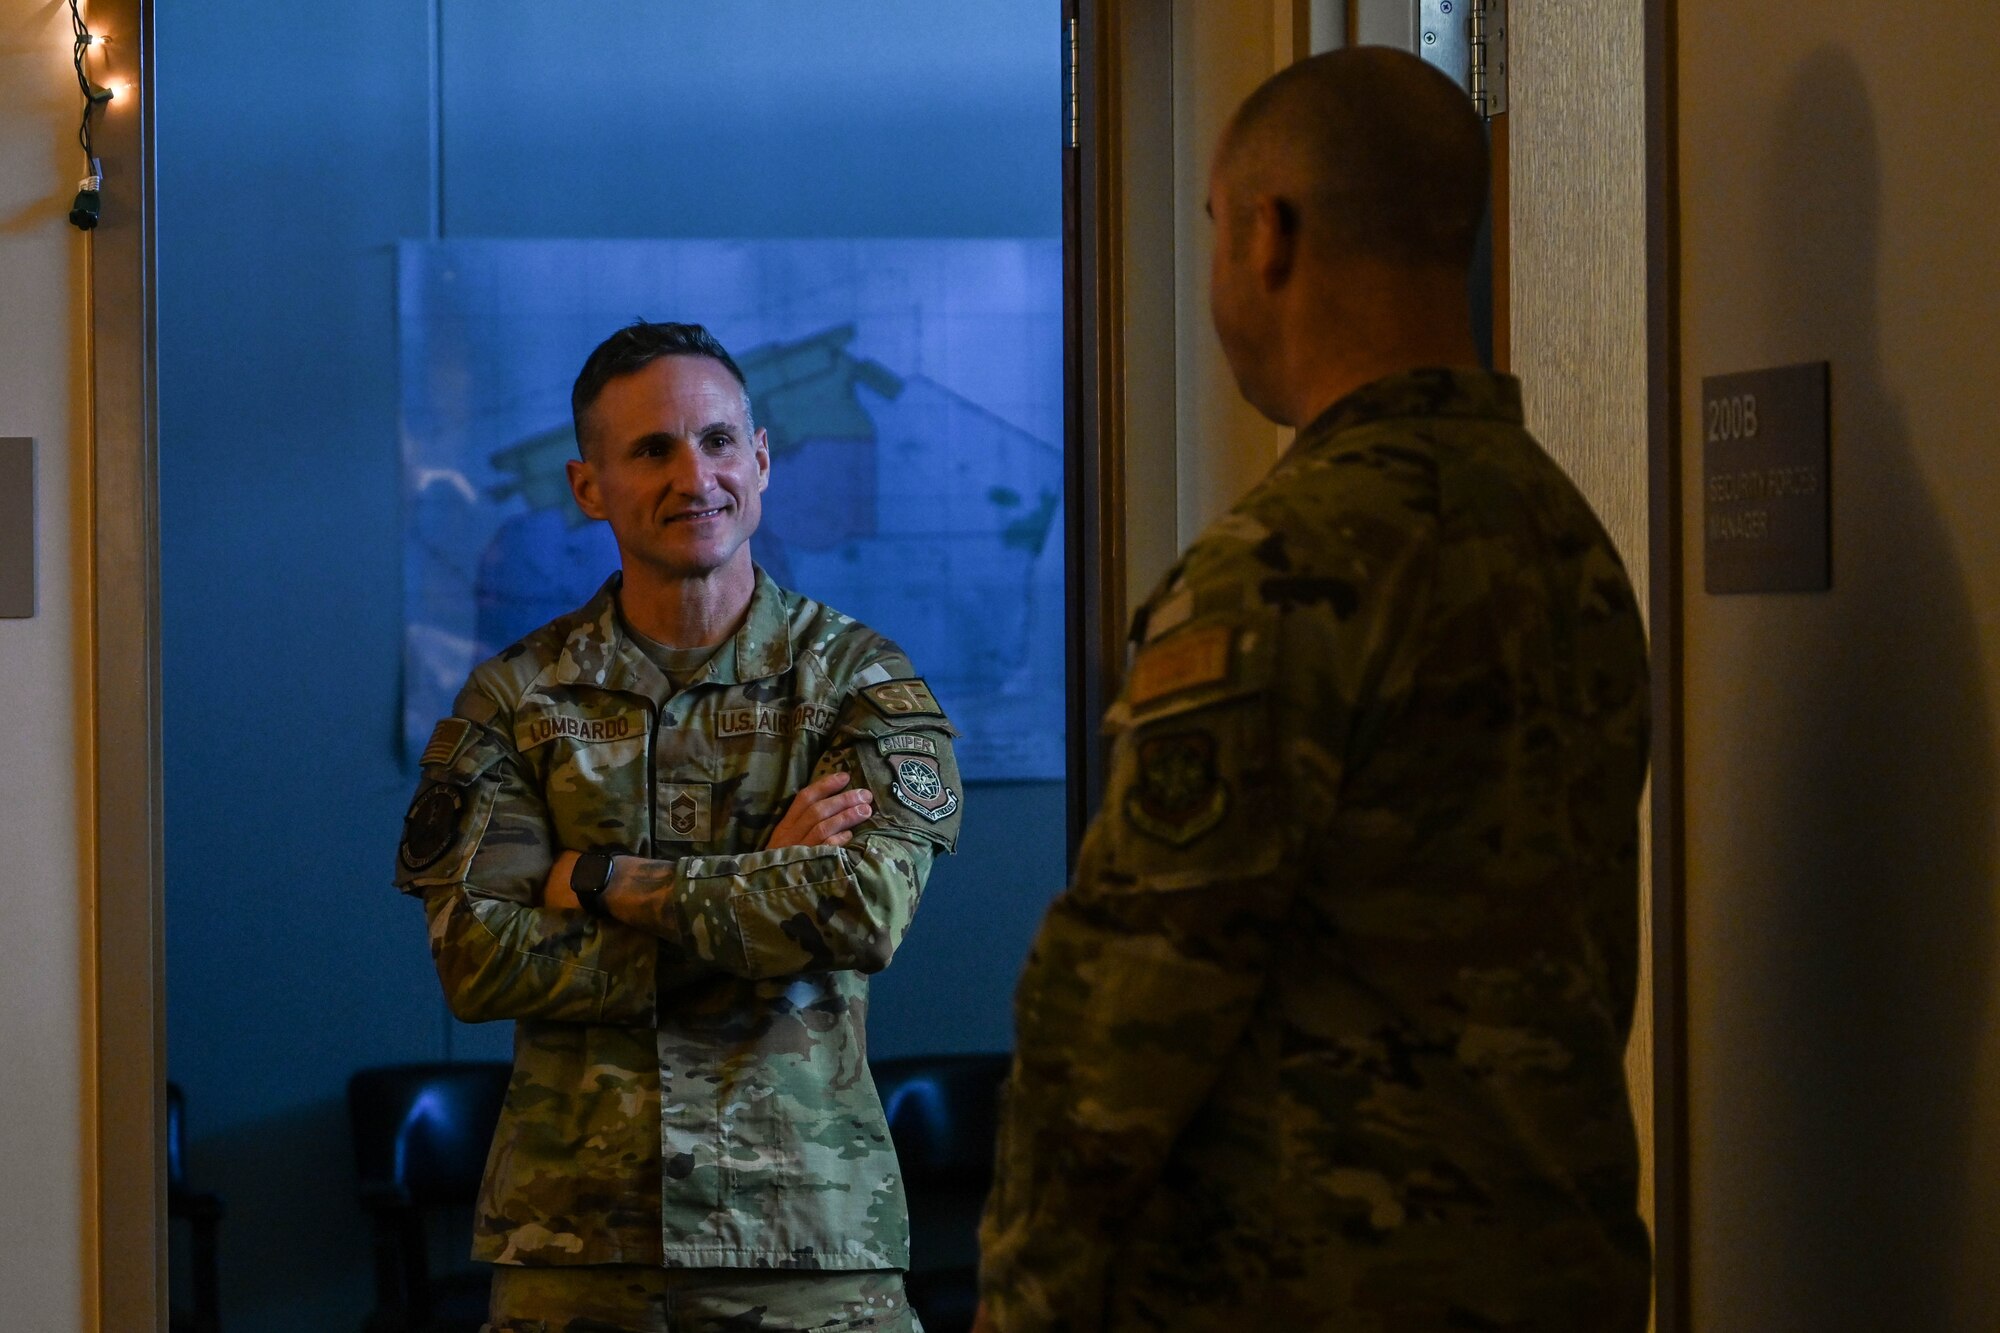 Two Air Force Military Members talking in a hallway.